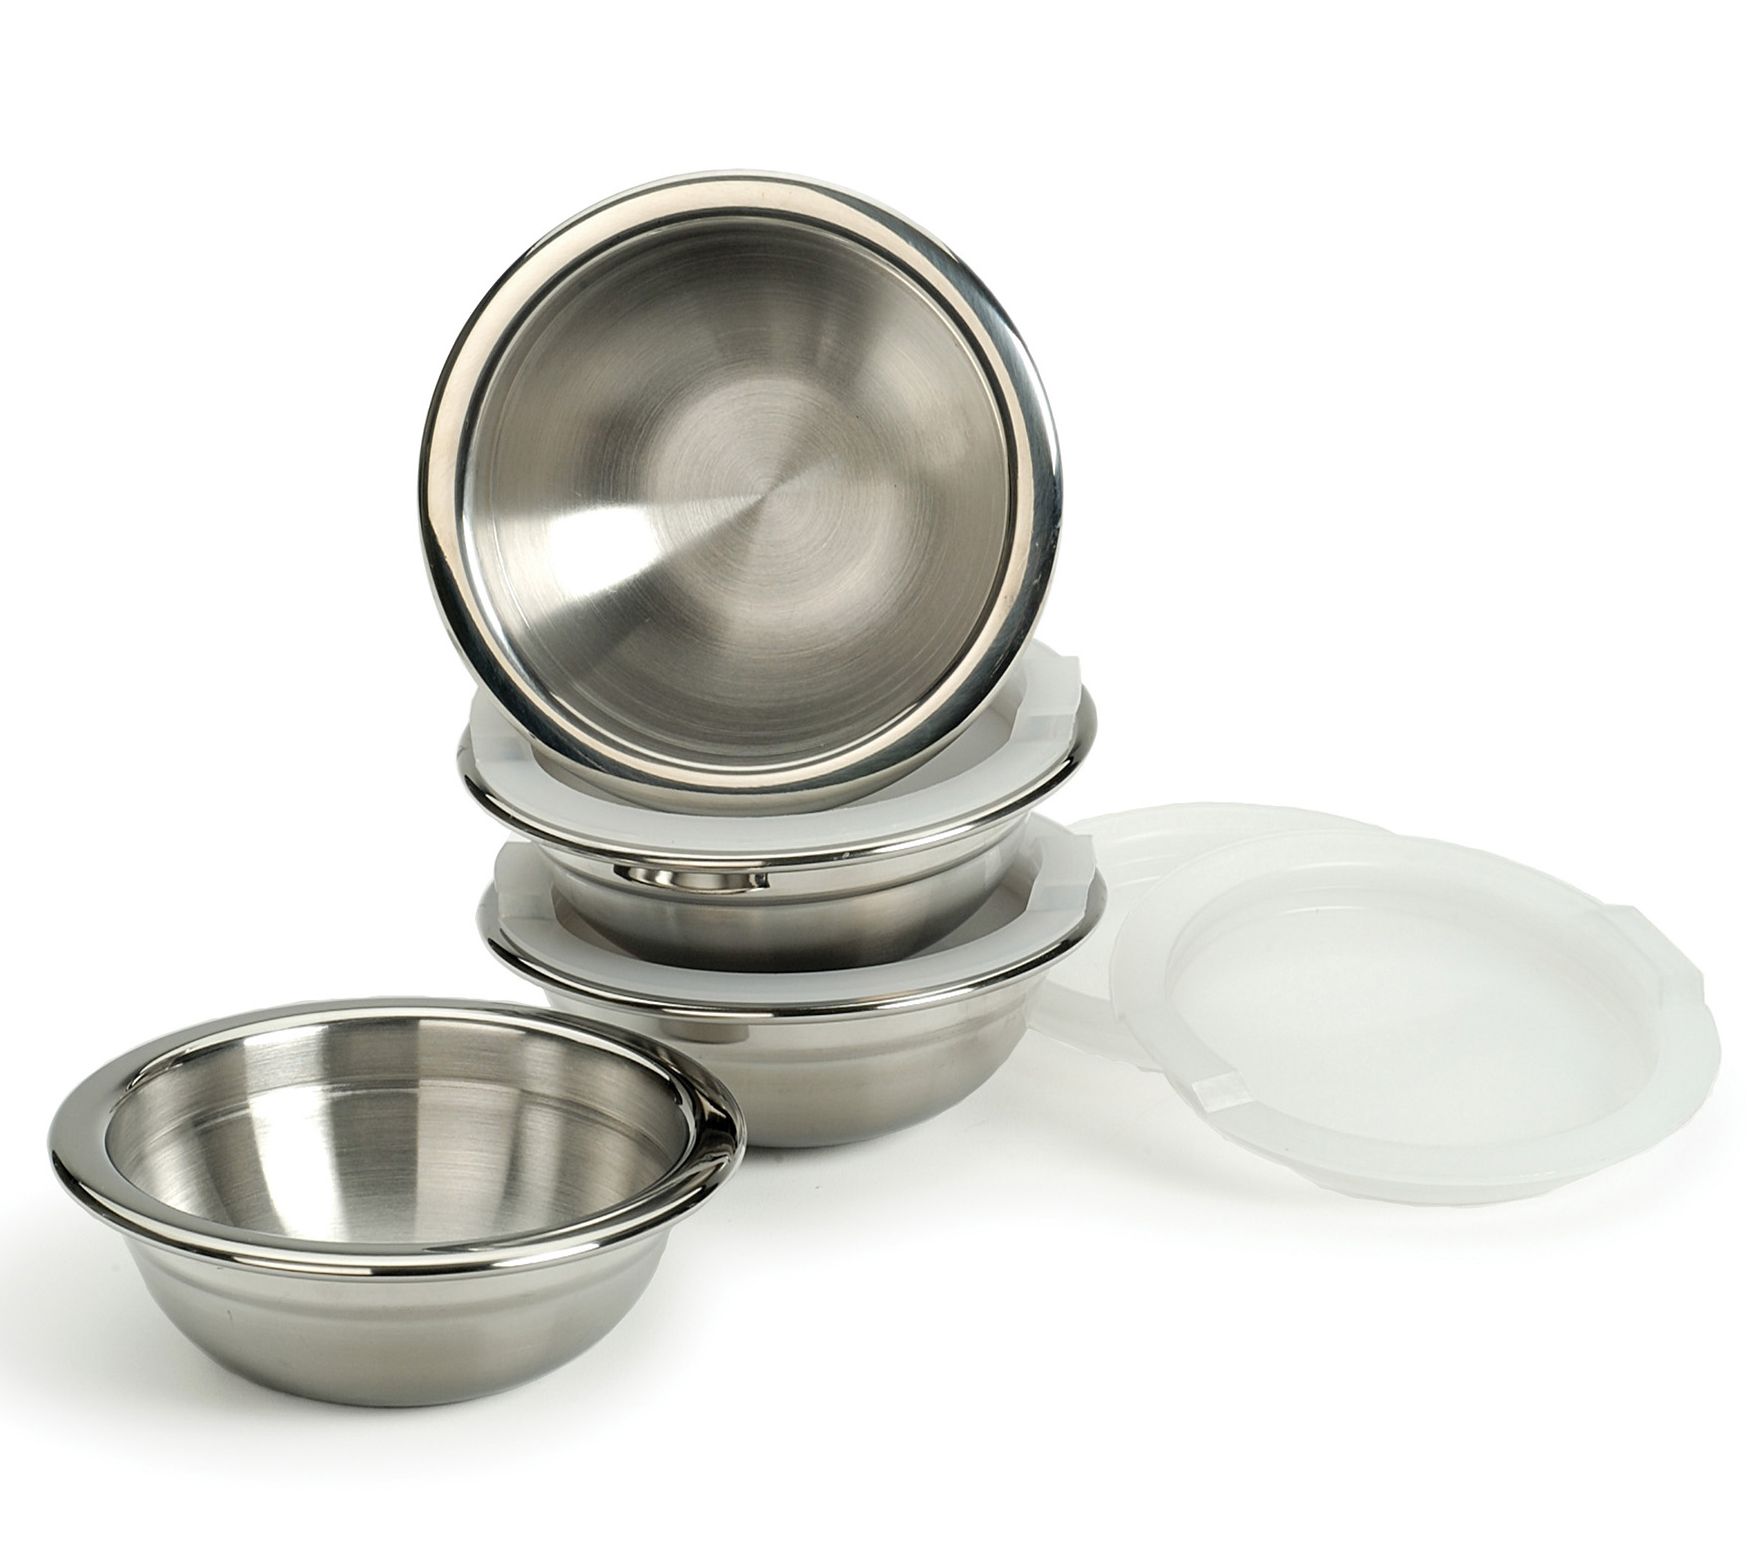 Rsvp Set of 4 Condiment Cups with Lids ,Silver